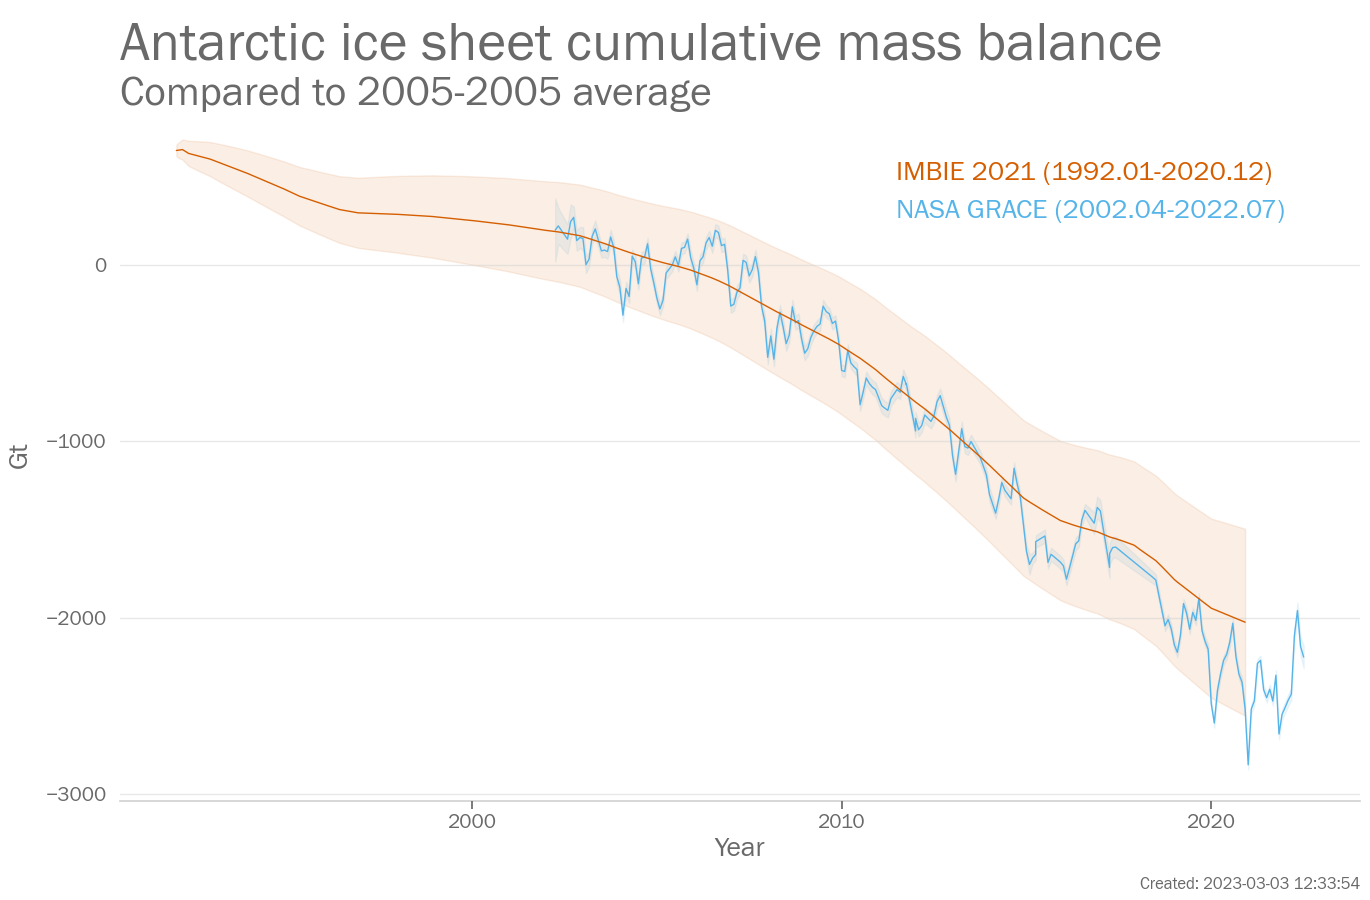 Monthly Antarctic ice sheet cumulative mass balance (Gt, difference from the 2005-2005 average)  from 1992-2022. Data are from the following two data sets: NASA GRACE, IMBIE 2021.